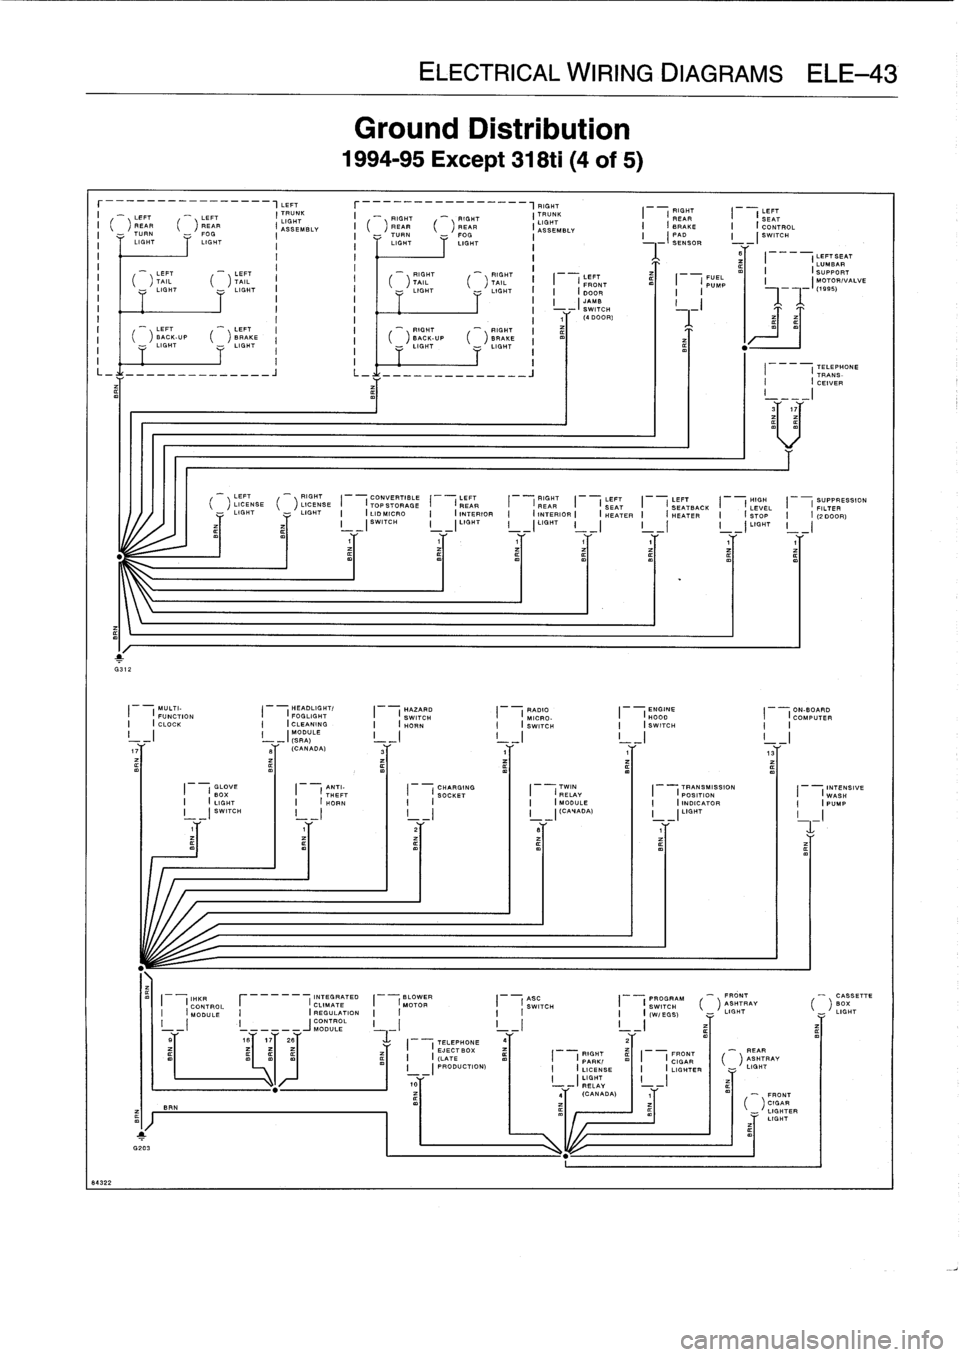 BMW 318i 1997 E36 Owners Manual 
ELECTRICAL
WIRING
DIAGRAMSELE-43

r----------_-__--,LEFT

	

r---__-------~_--,FIGHT
I

	

-

	

RIGHT

	

LIT
LEFT

	

"-

	

LEFT

	

I
IGHT
K

	

I

	

_

	

RIGHT

	



	

RIGHT

	

I
TRUNK
SEM